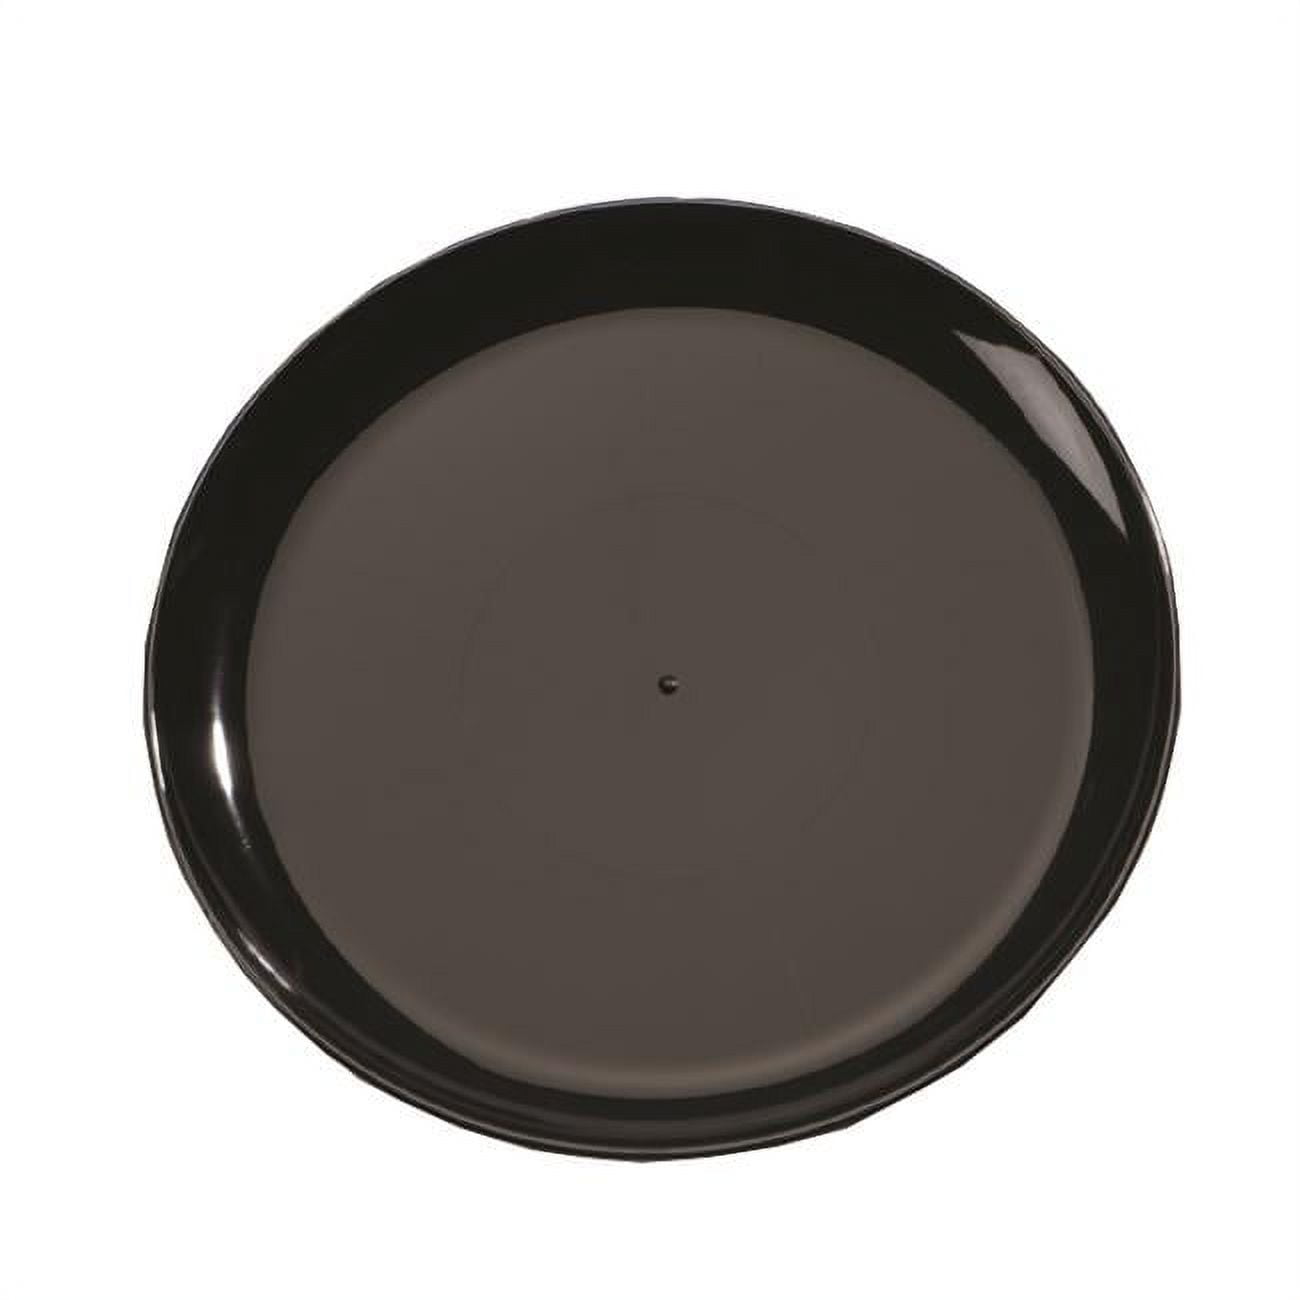 A718pbl25 Pec 18 In. Round Catering Tray, Black